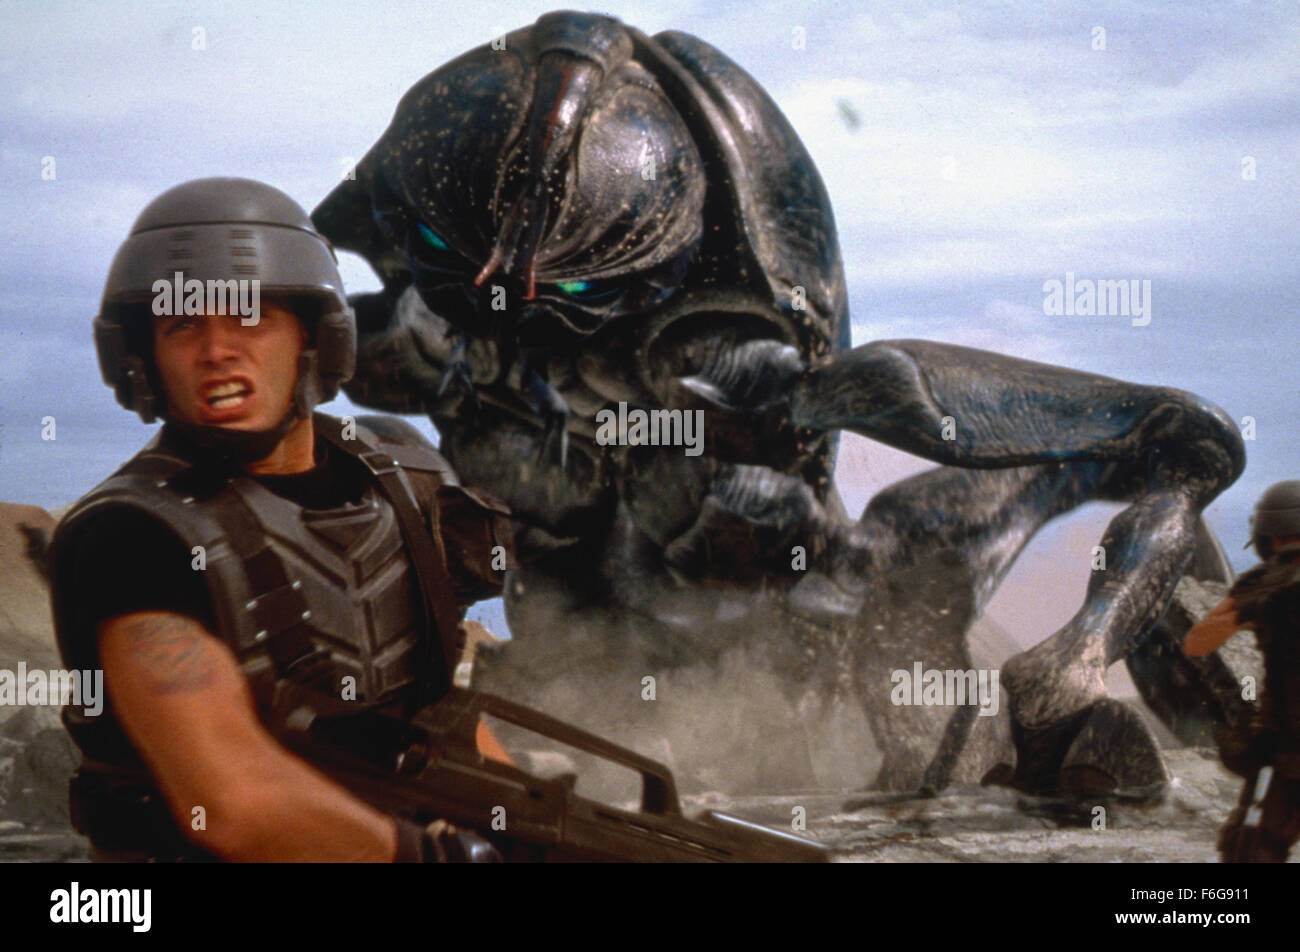 RELEASE DATE: November 7, 1997. MOVIE TITLE: Starship Troopers. STUDIO: TriStar Pictures. PLOT: The time is the future. Johnny Rico joins the military after graduation to become a citizen and for the love of his high school sweetheart. In the war against the bug aliens of Klendathu, the military is a very dangerous place to be. Johnny works his way through several battles and with the help of his friends and comrades, helps turn the tide of the war, and save the human race. PICTURED: . Stock Photo